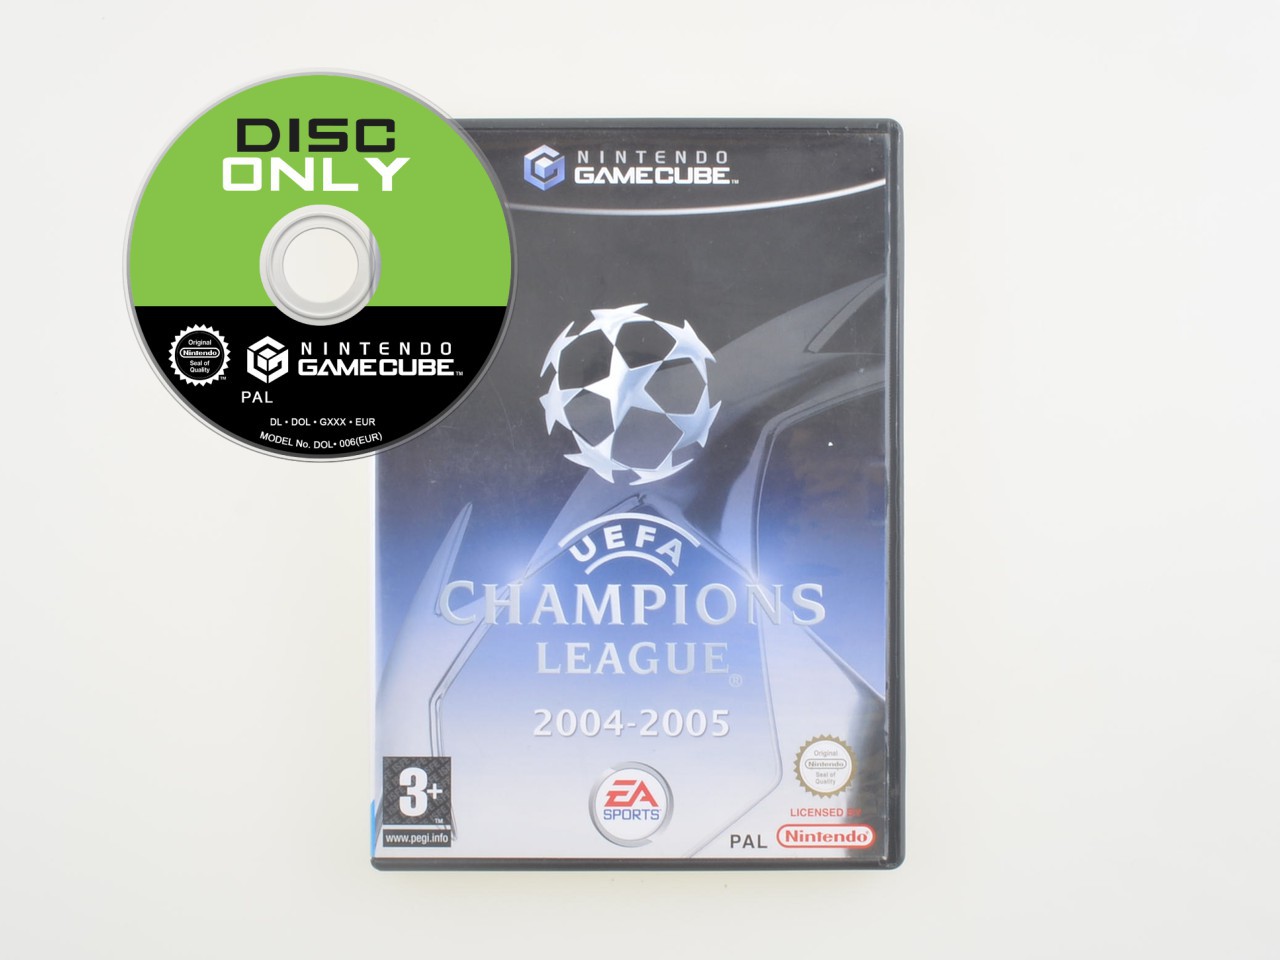 UEFA Champions League 2004-2005 - Disc Only - Gamecube Games